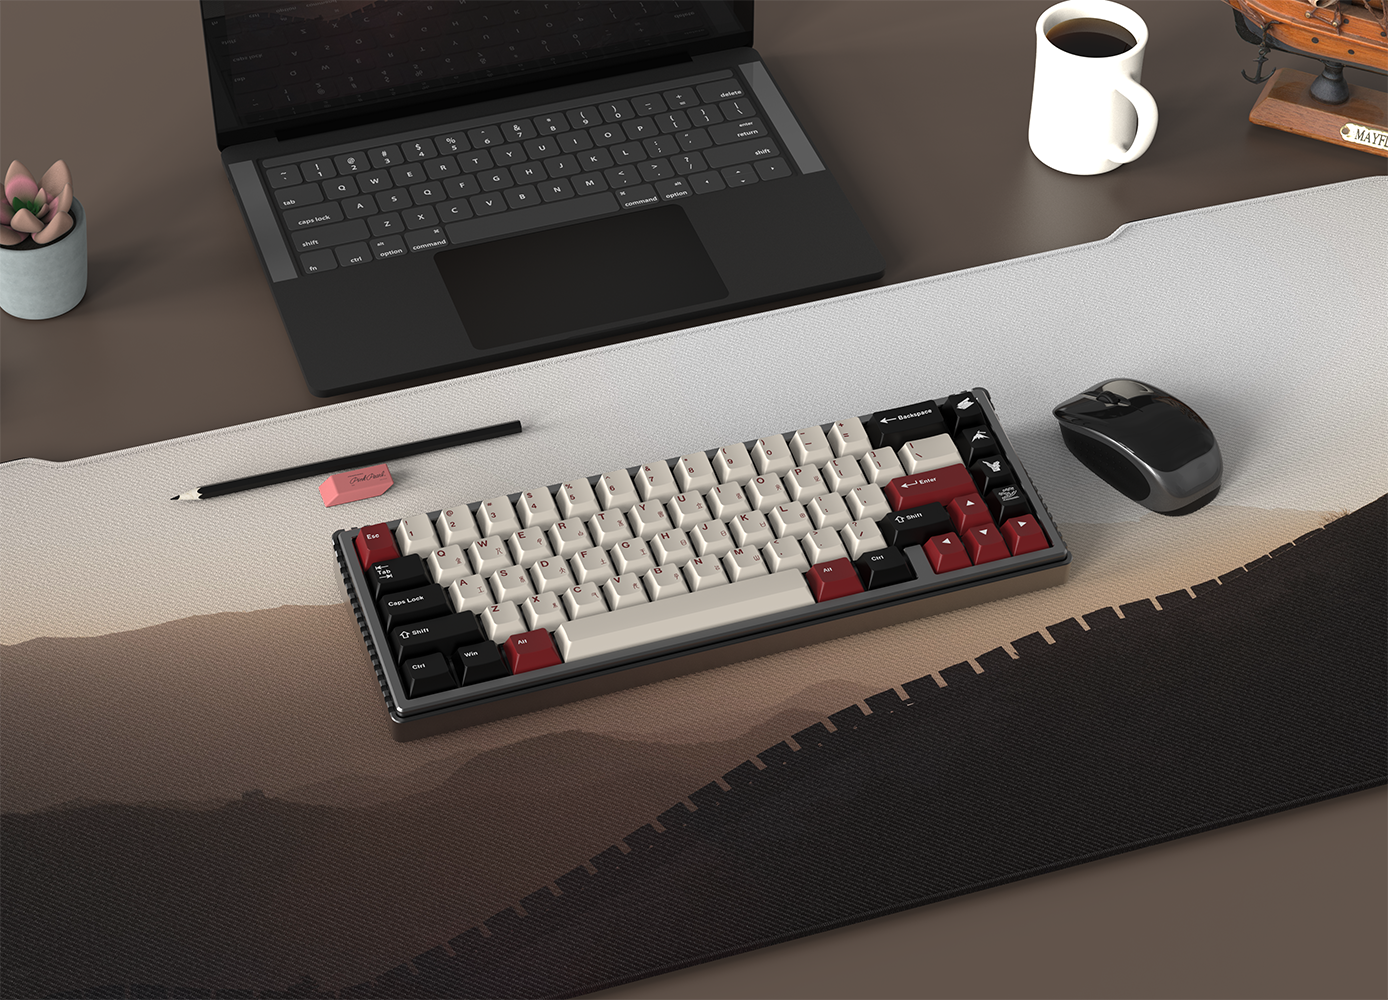 The Great Wall Keycaps - KeebsForAll